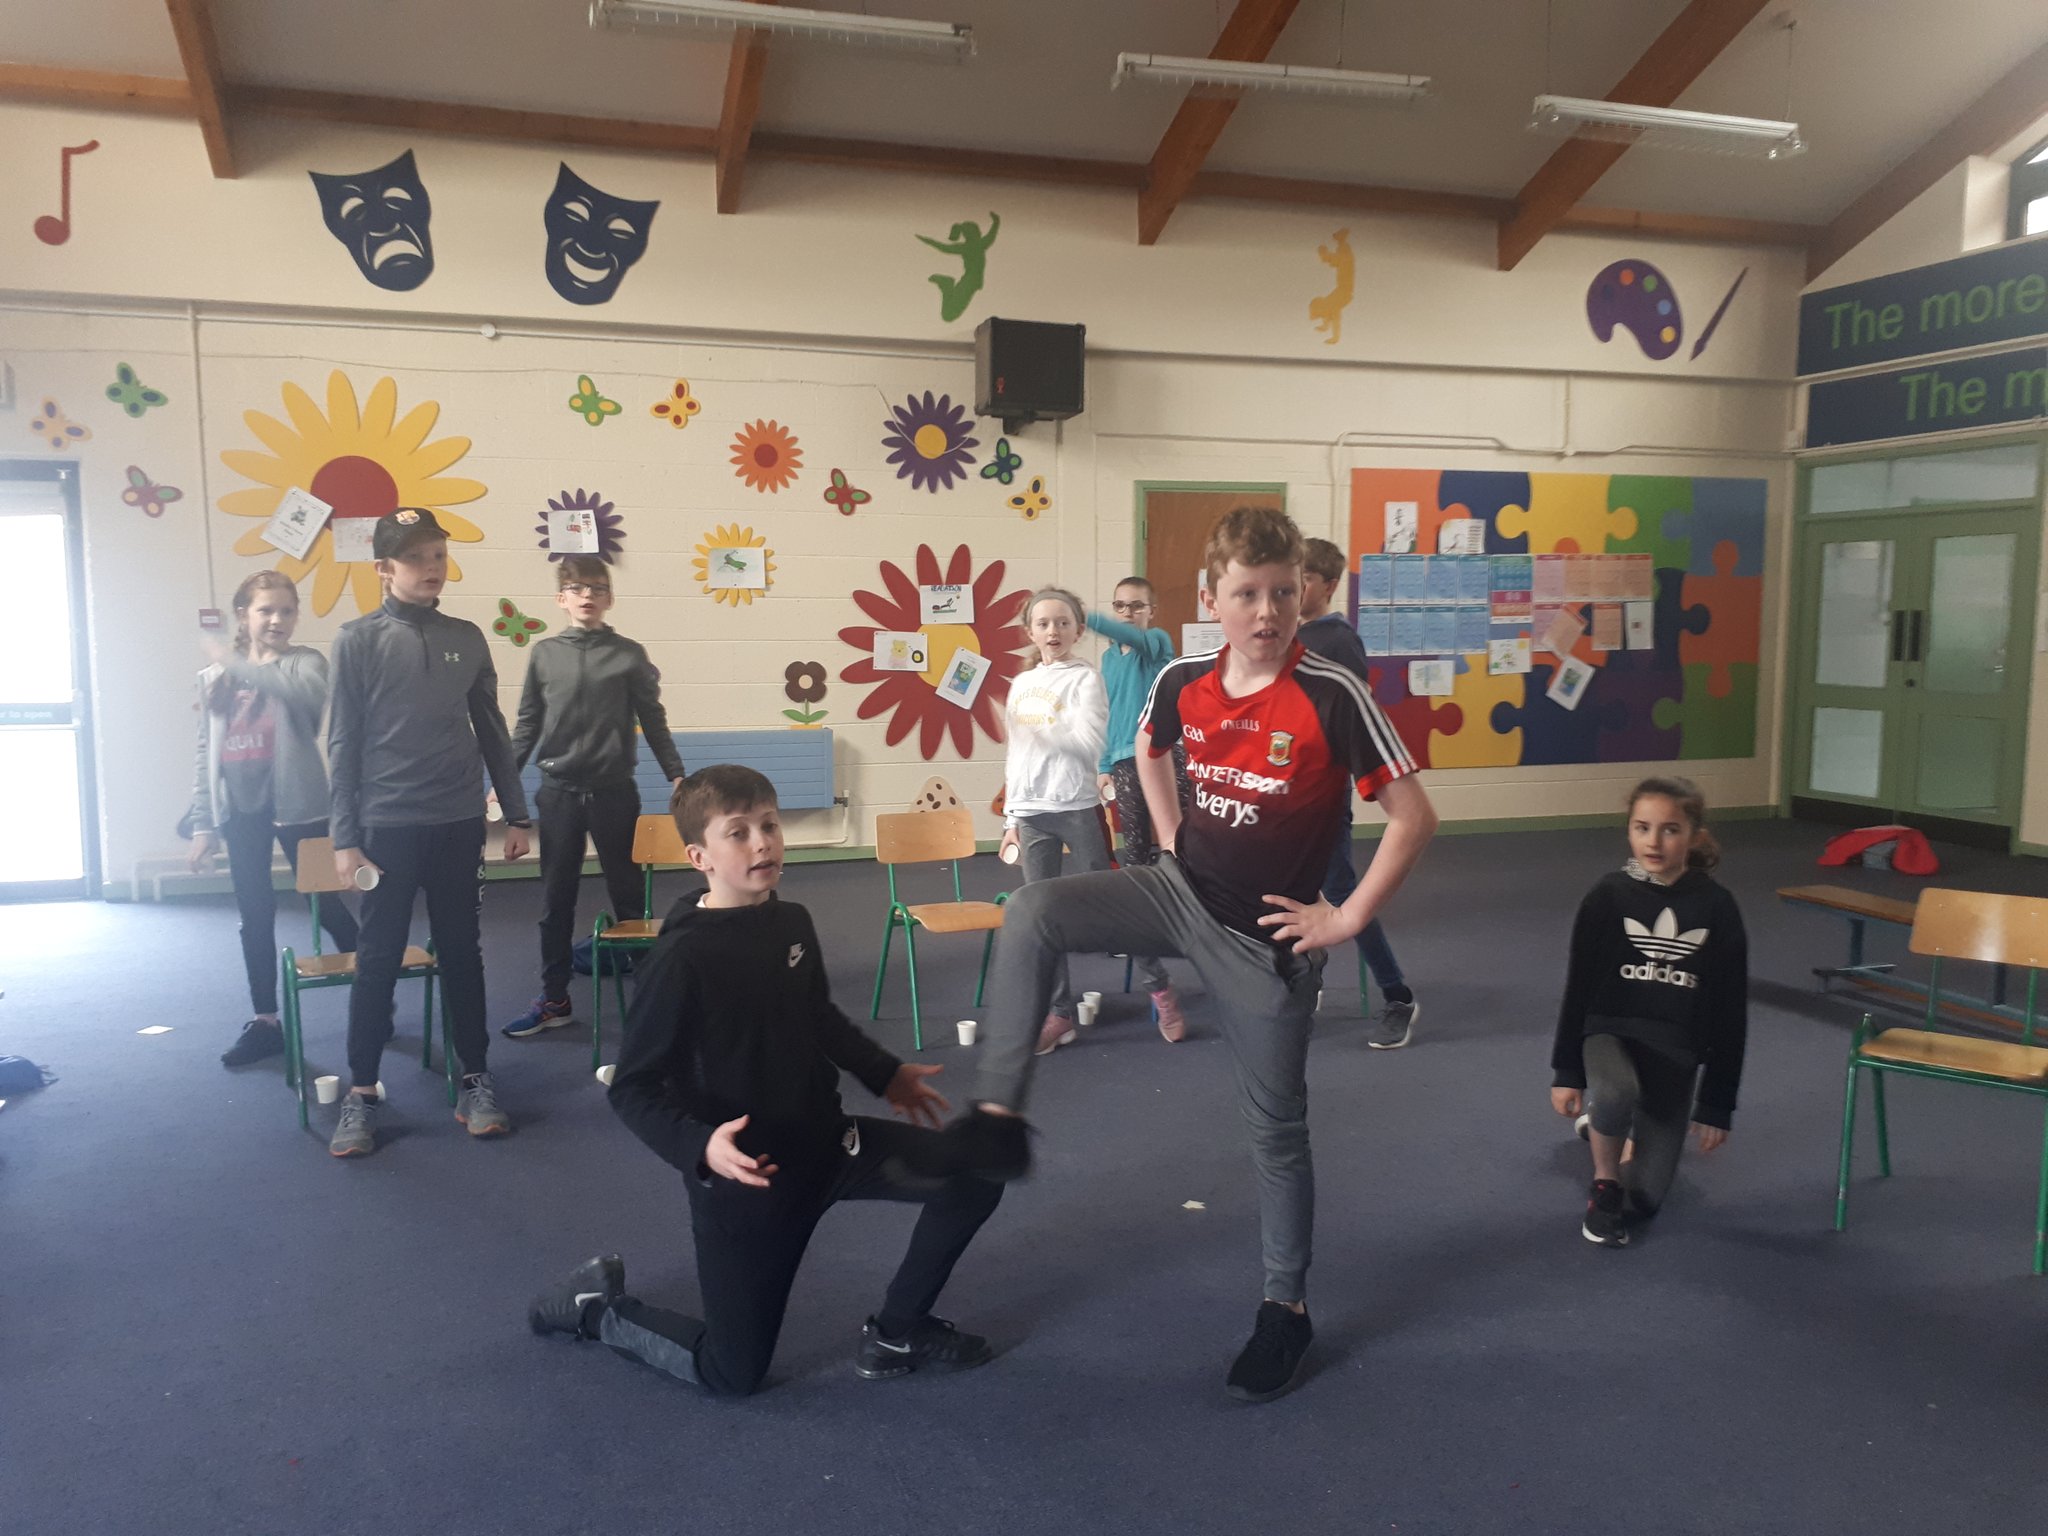 Scoil Mochua Celbridge on Twitter: "Rehearsals for Beauty and the Beast in  full swing this week! Don't miss out on your chance to see this amazing  show when tickets go on sale